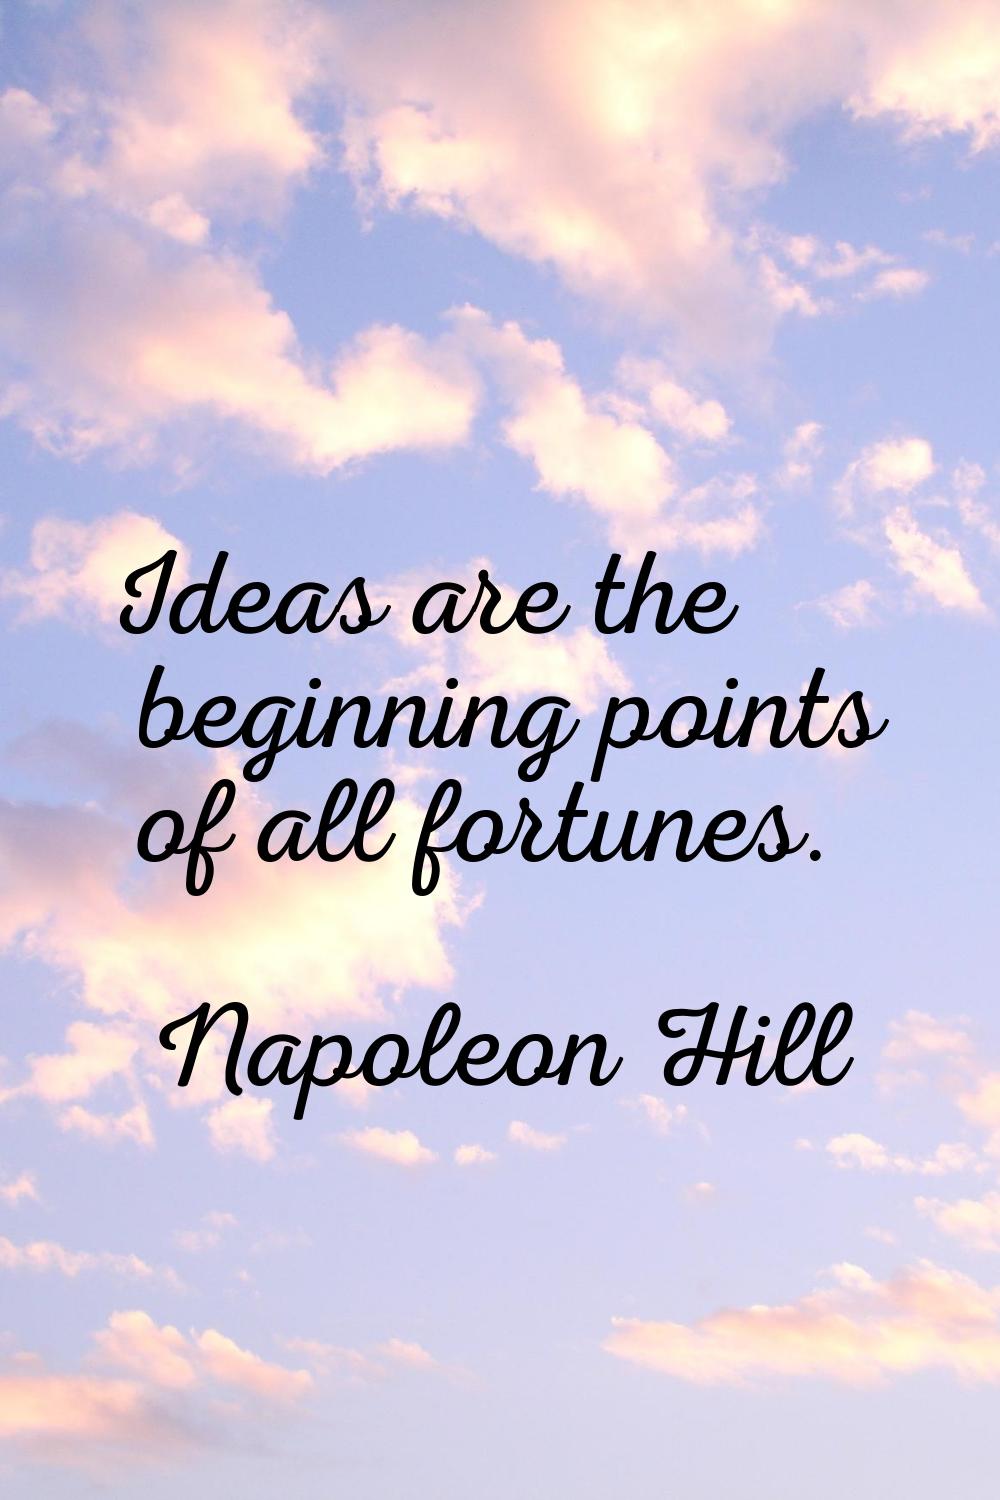 Ideas are the beginning points of all fortunes.